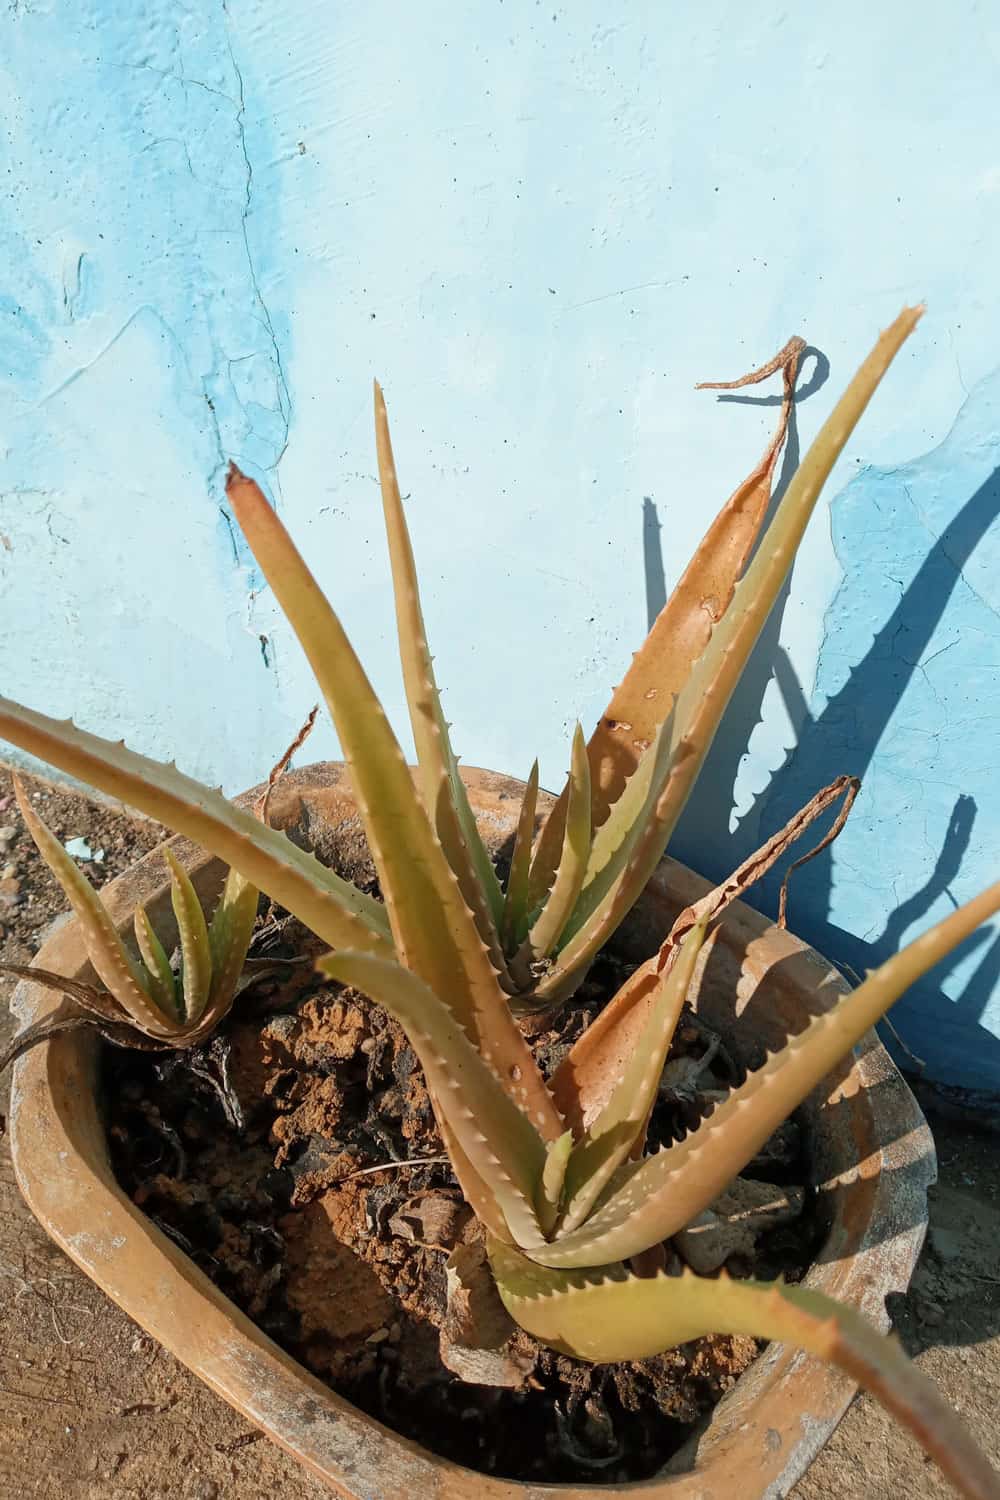 A small and withering aloe vera plant